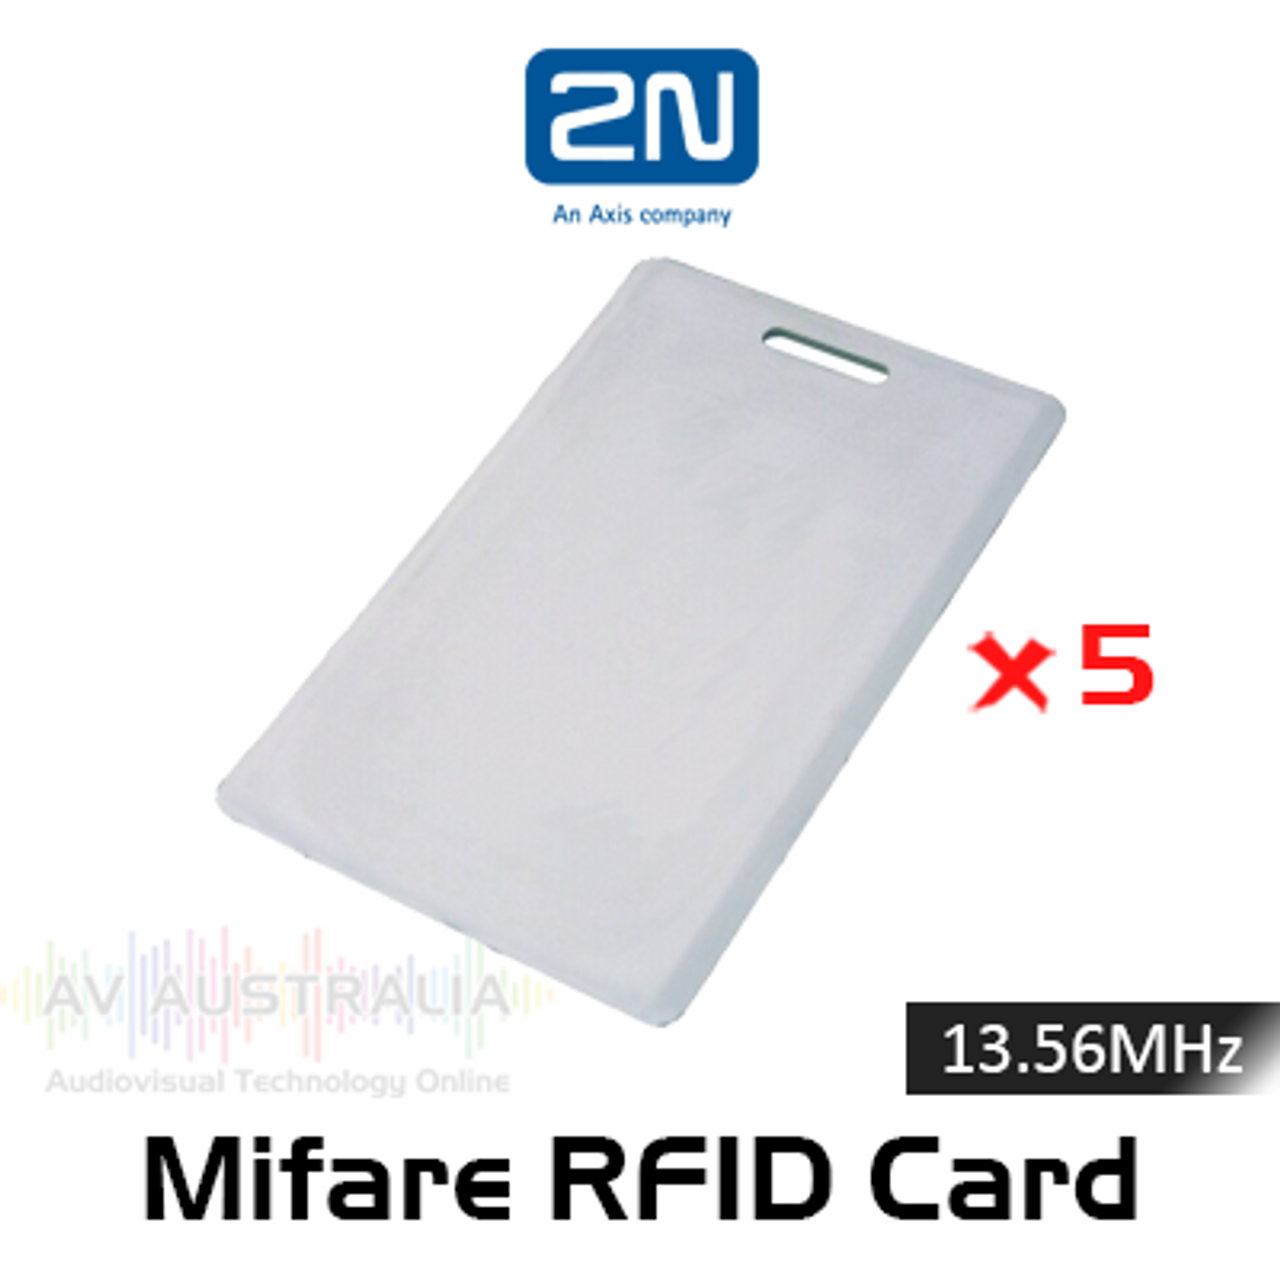 2N Mifare RFID Proximity Card For 13.56MHz Smart Card Reader (5 Pack)